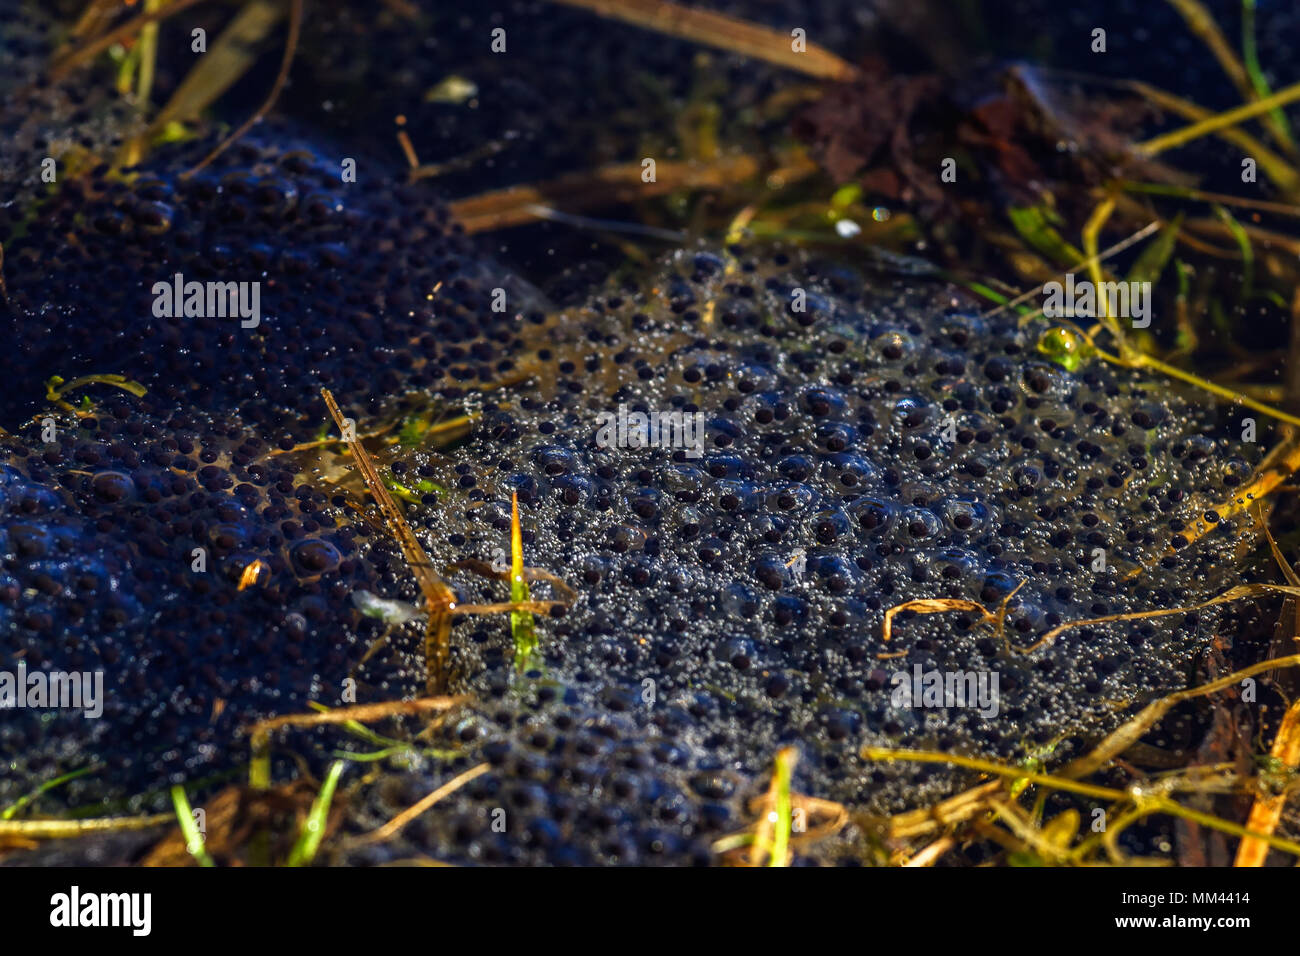 Frogspawn in the water at spring Stock Photo